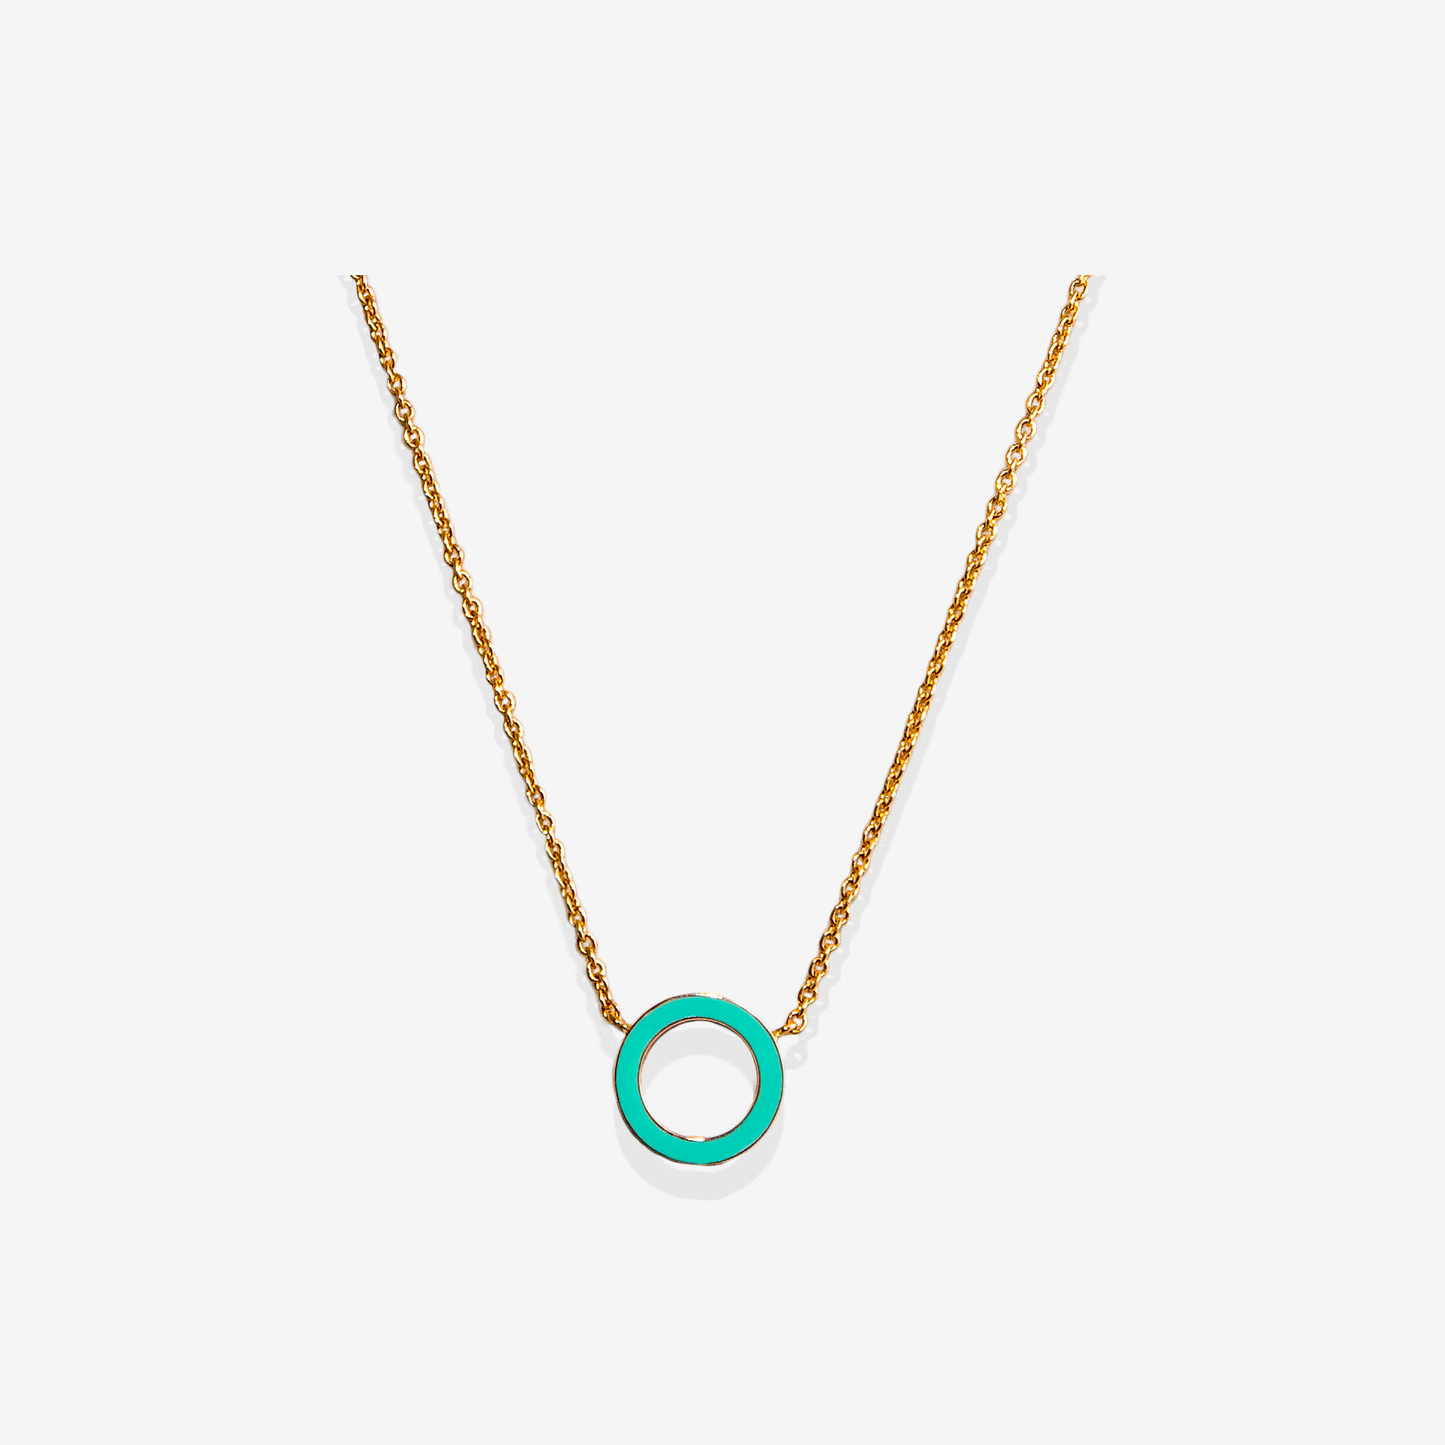 Inside turquoise necklace